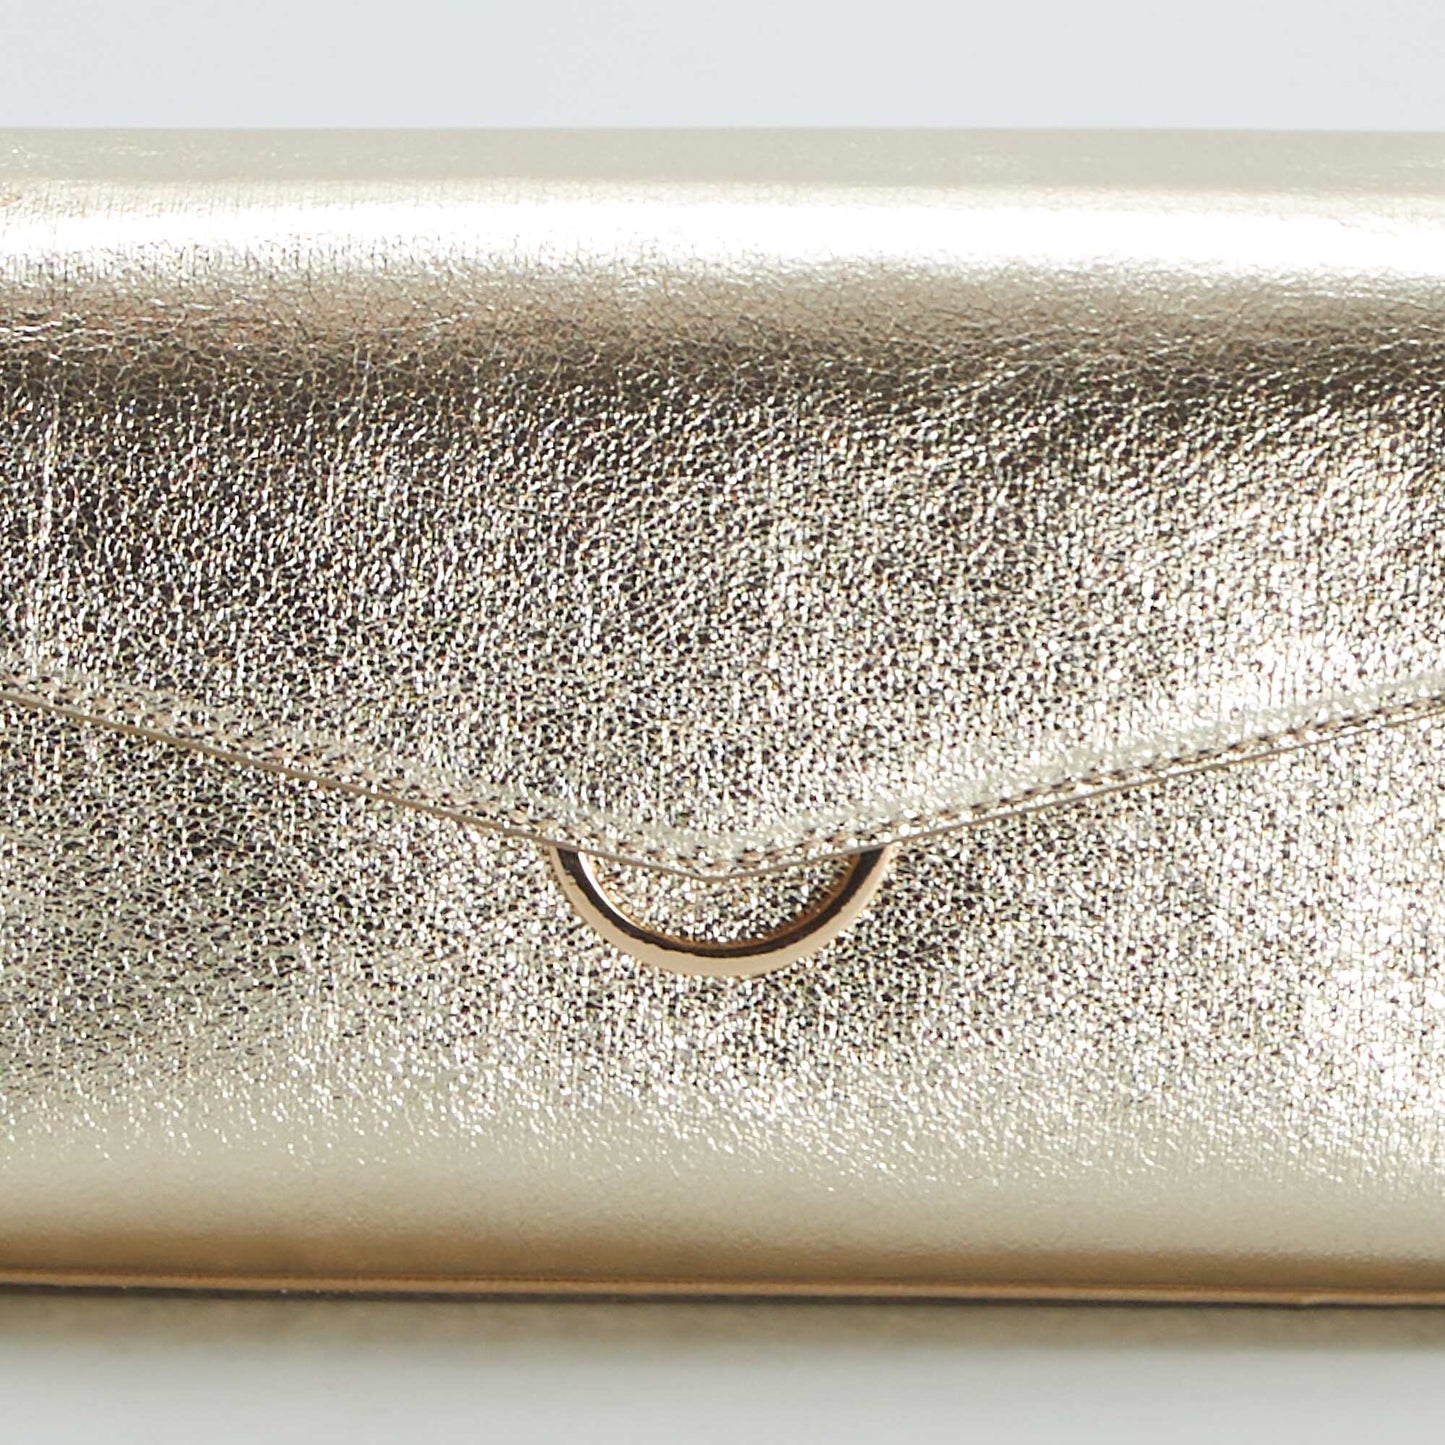 Shimmery golden chain clutch YELLOW